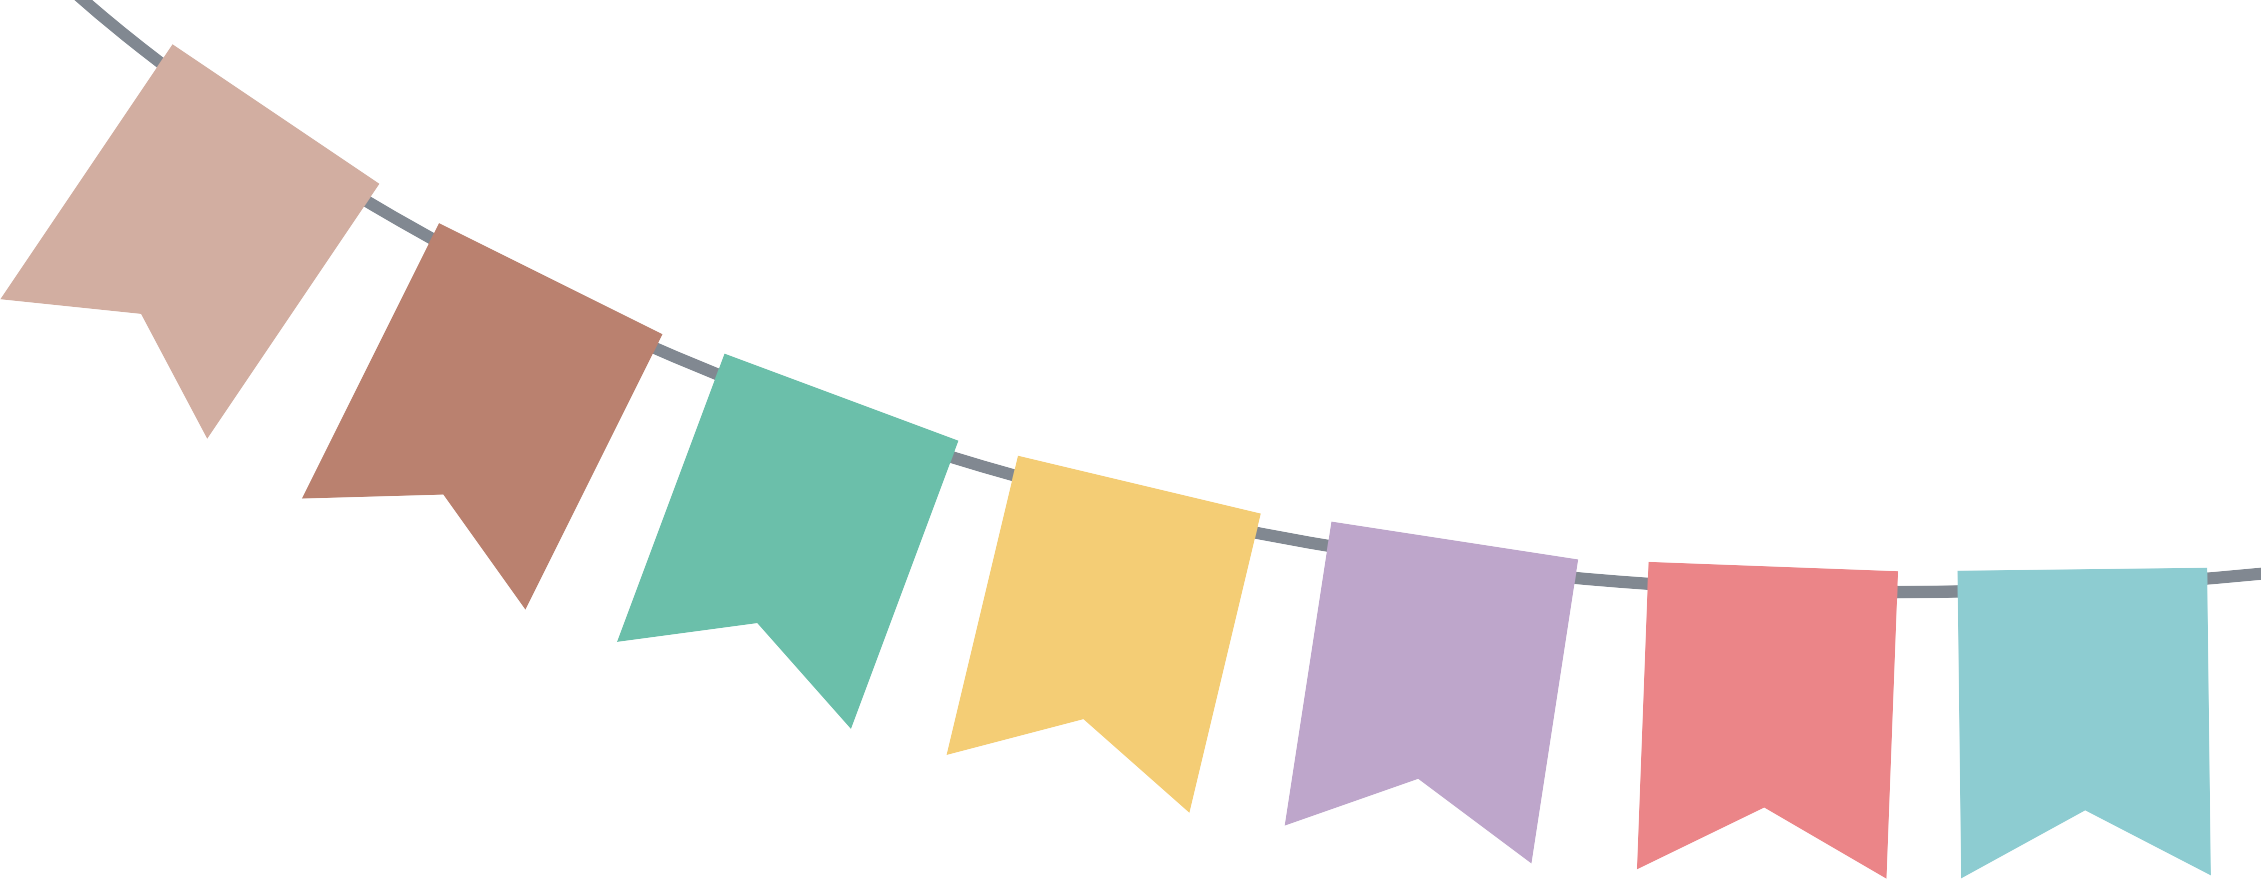 Party Flags No Background Clip Art